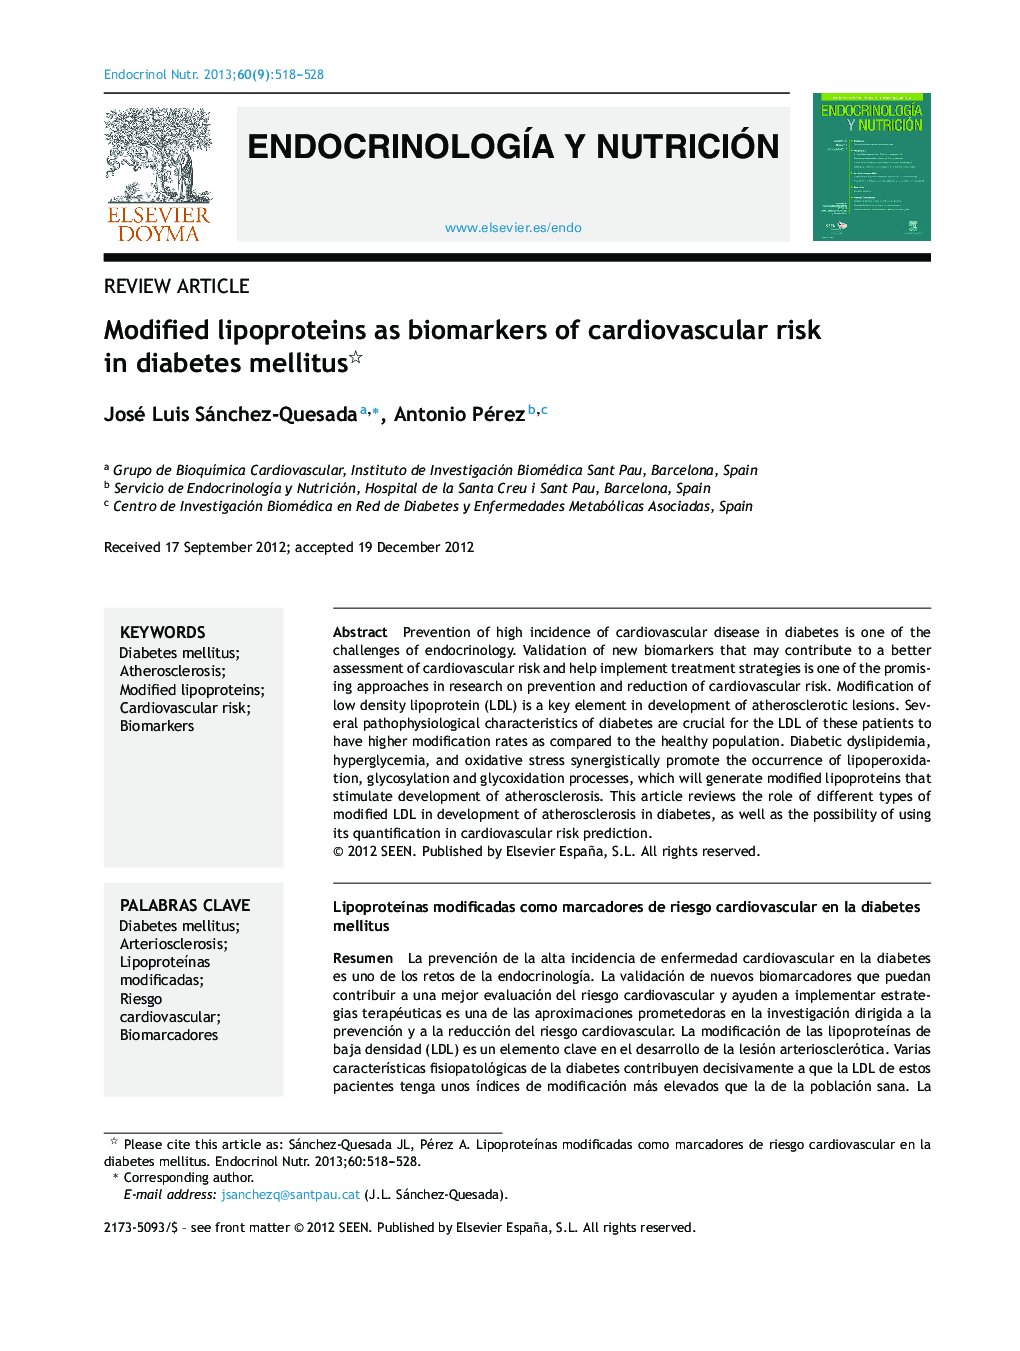 Modified lipoproteins as biomarkers of cardiovascular risk in diabetes mellitus 